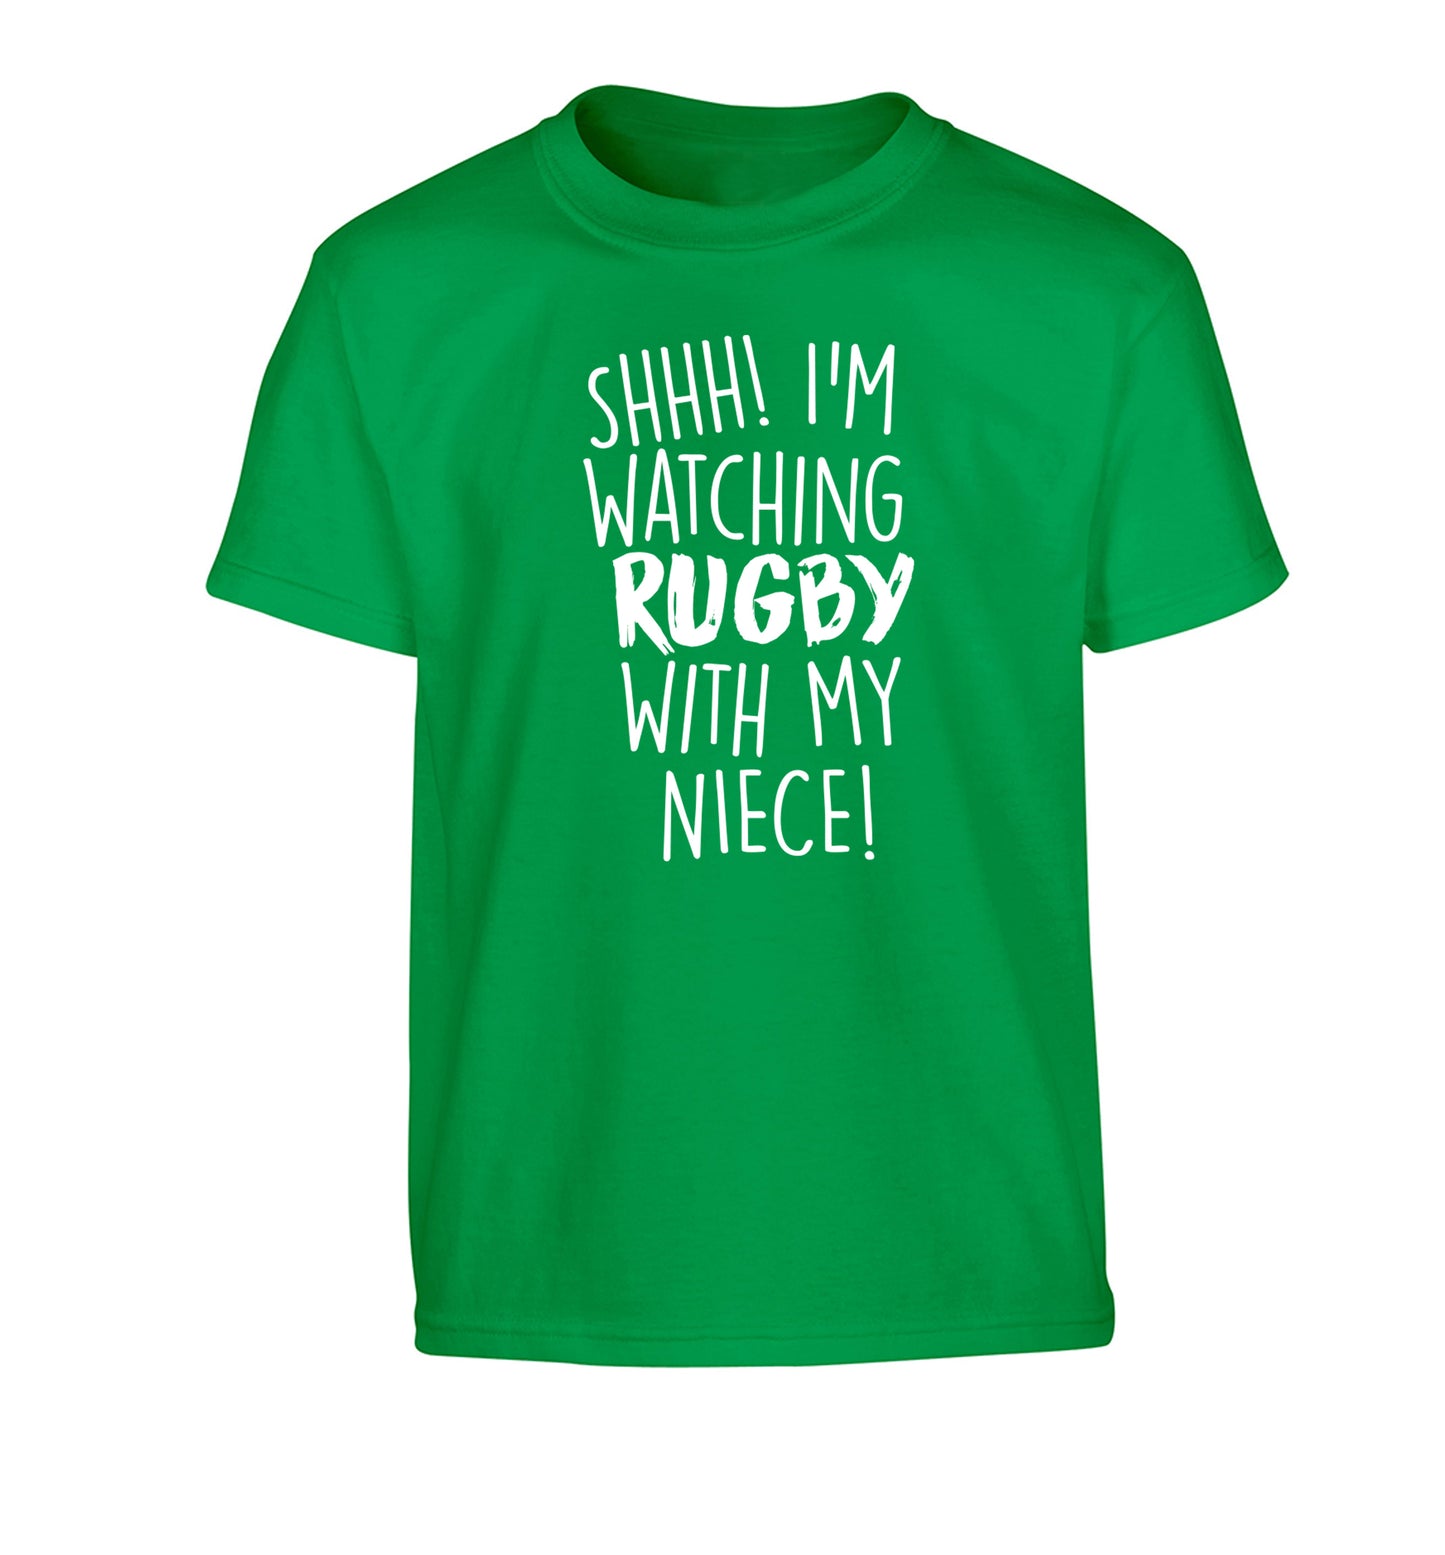 Shh.. I'm watching rugby with my niece Children's green Tshirt 12-13 Years